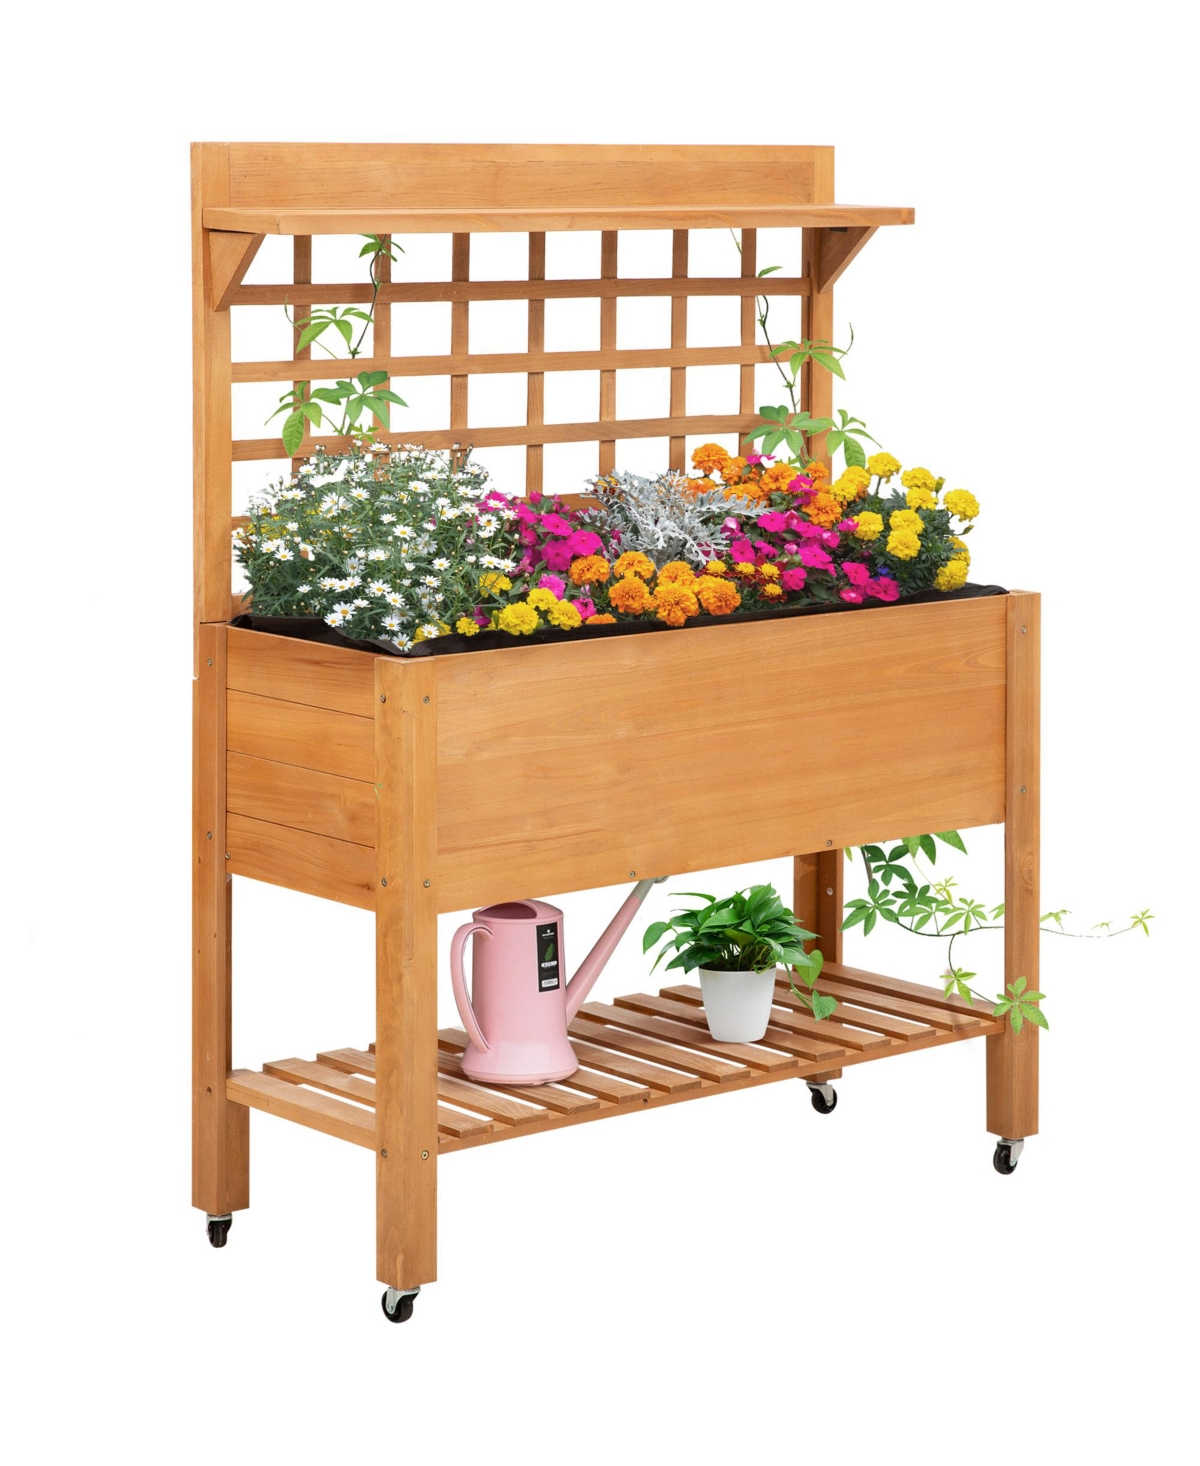 Outdoor Wooden Elevated Plant Bed w/ Shelves for Tool Storage & Wheels - Brown